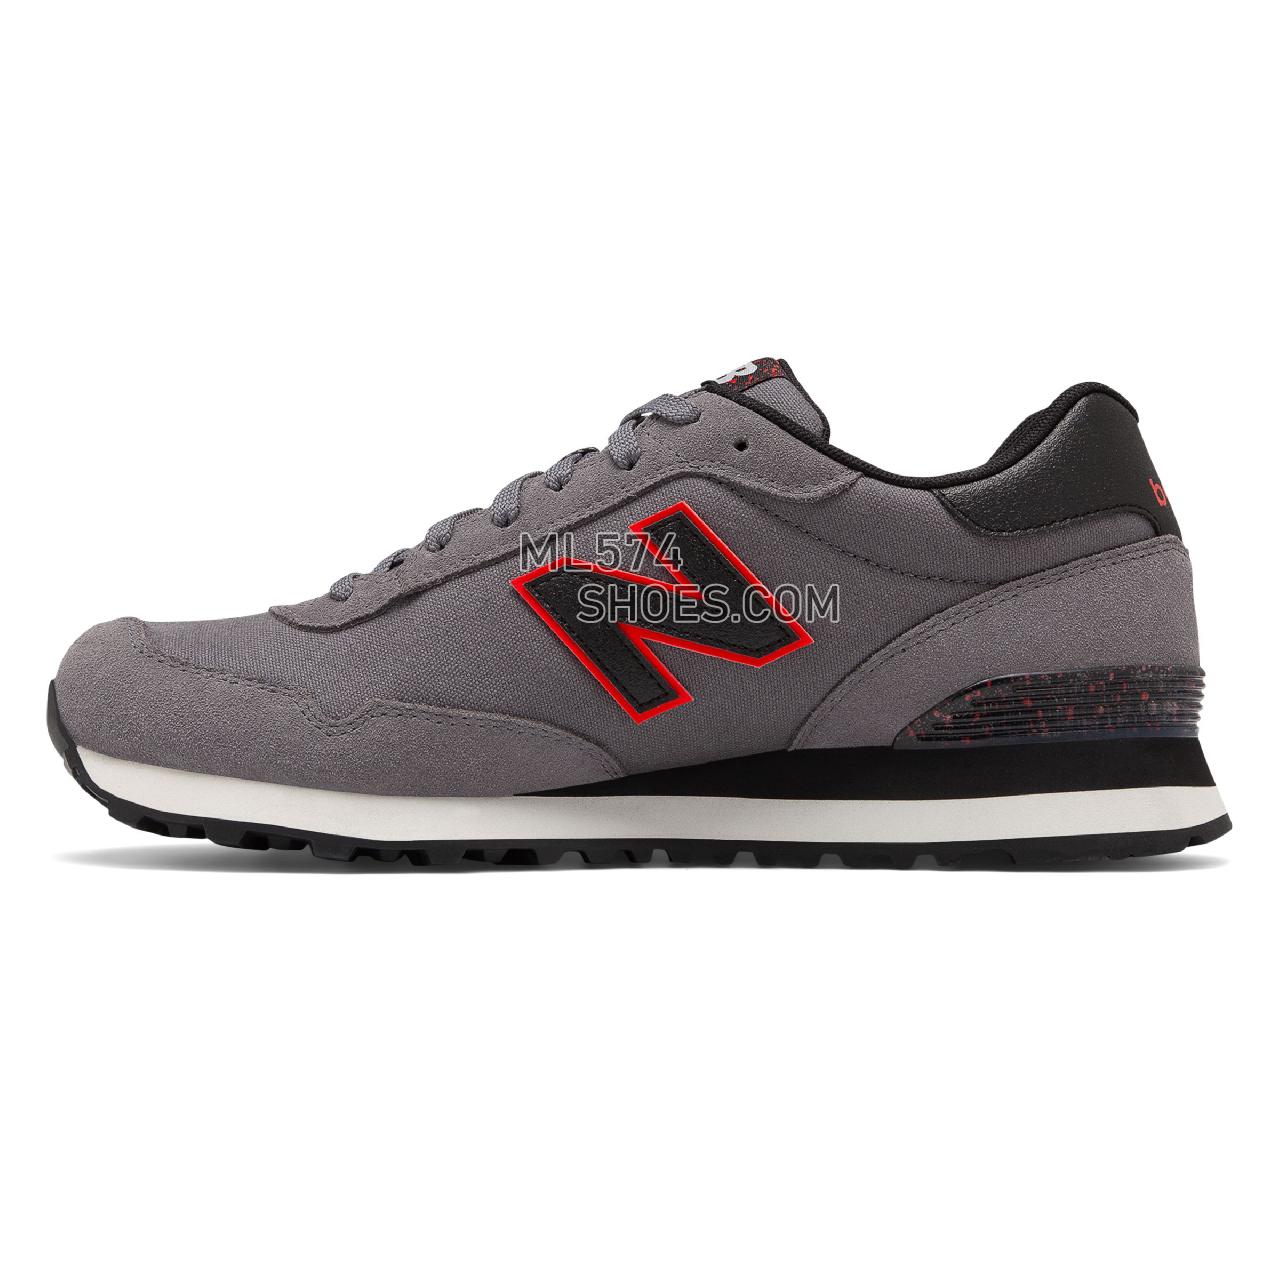 New Balance 515 Classic - Men's Sport Style Sneakers - Castlerock with Black and Velocity Red - ML515NBD